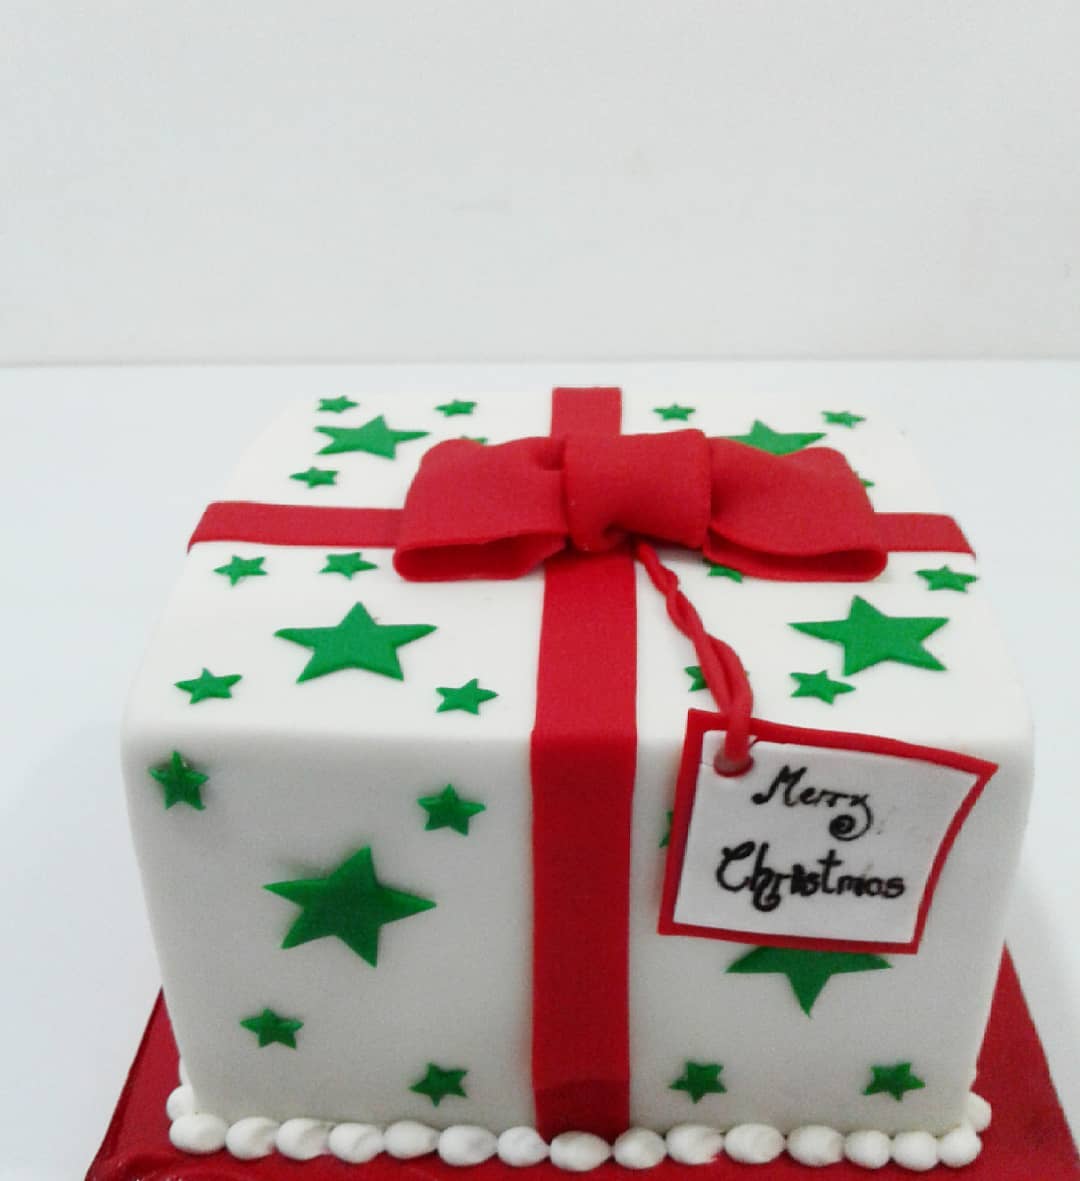 Gift cake idea. Pic by anitabakestore